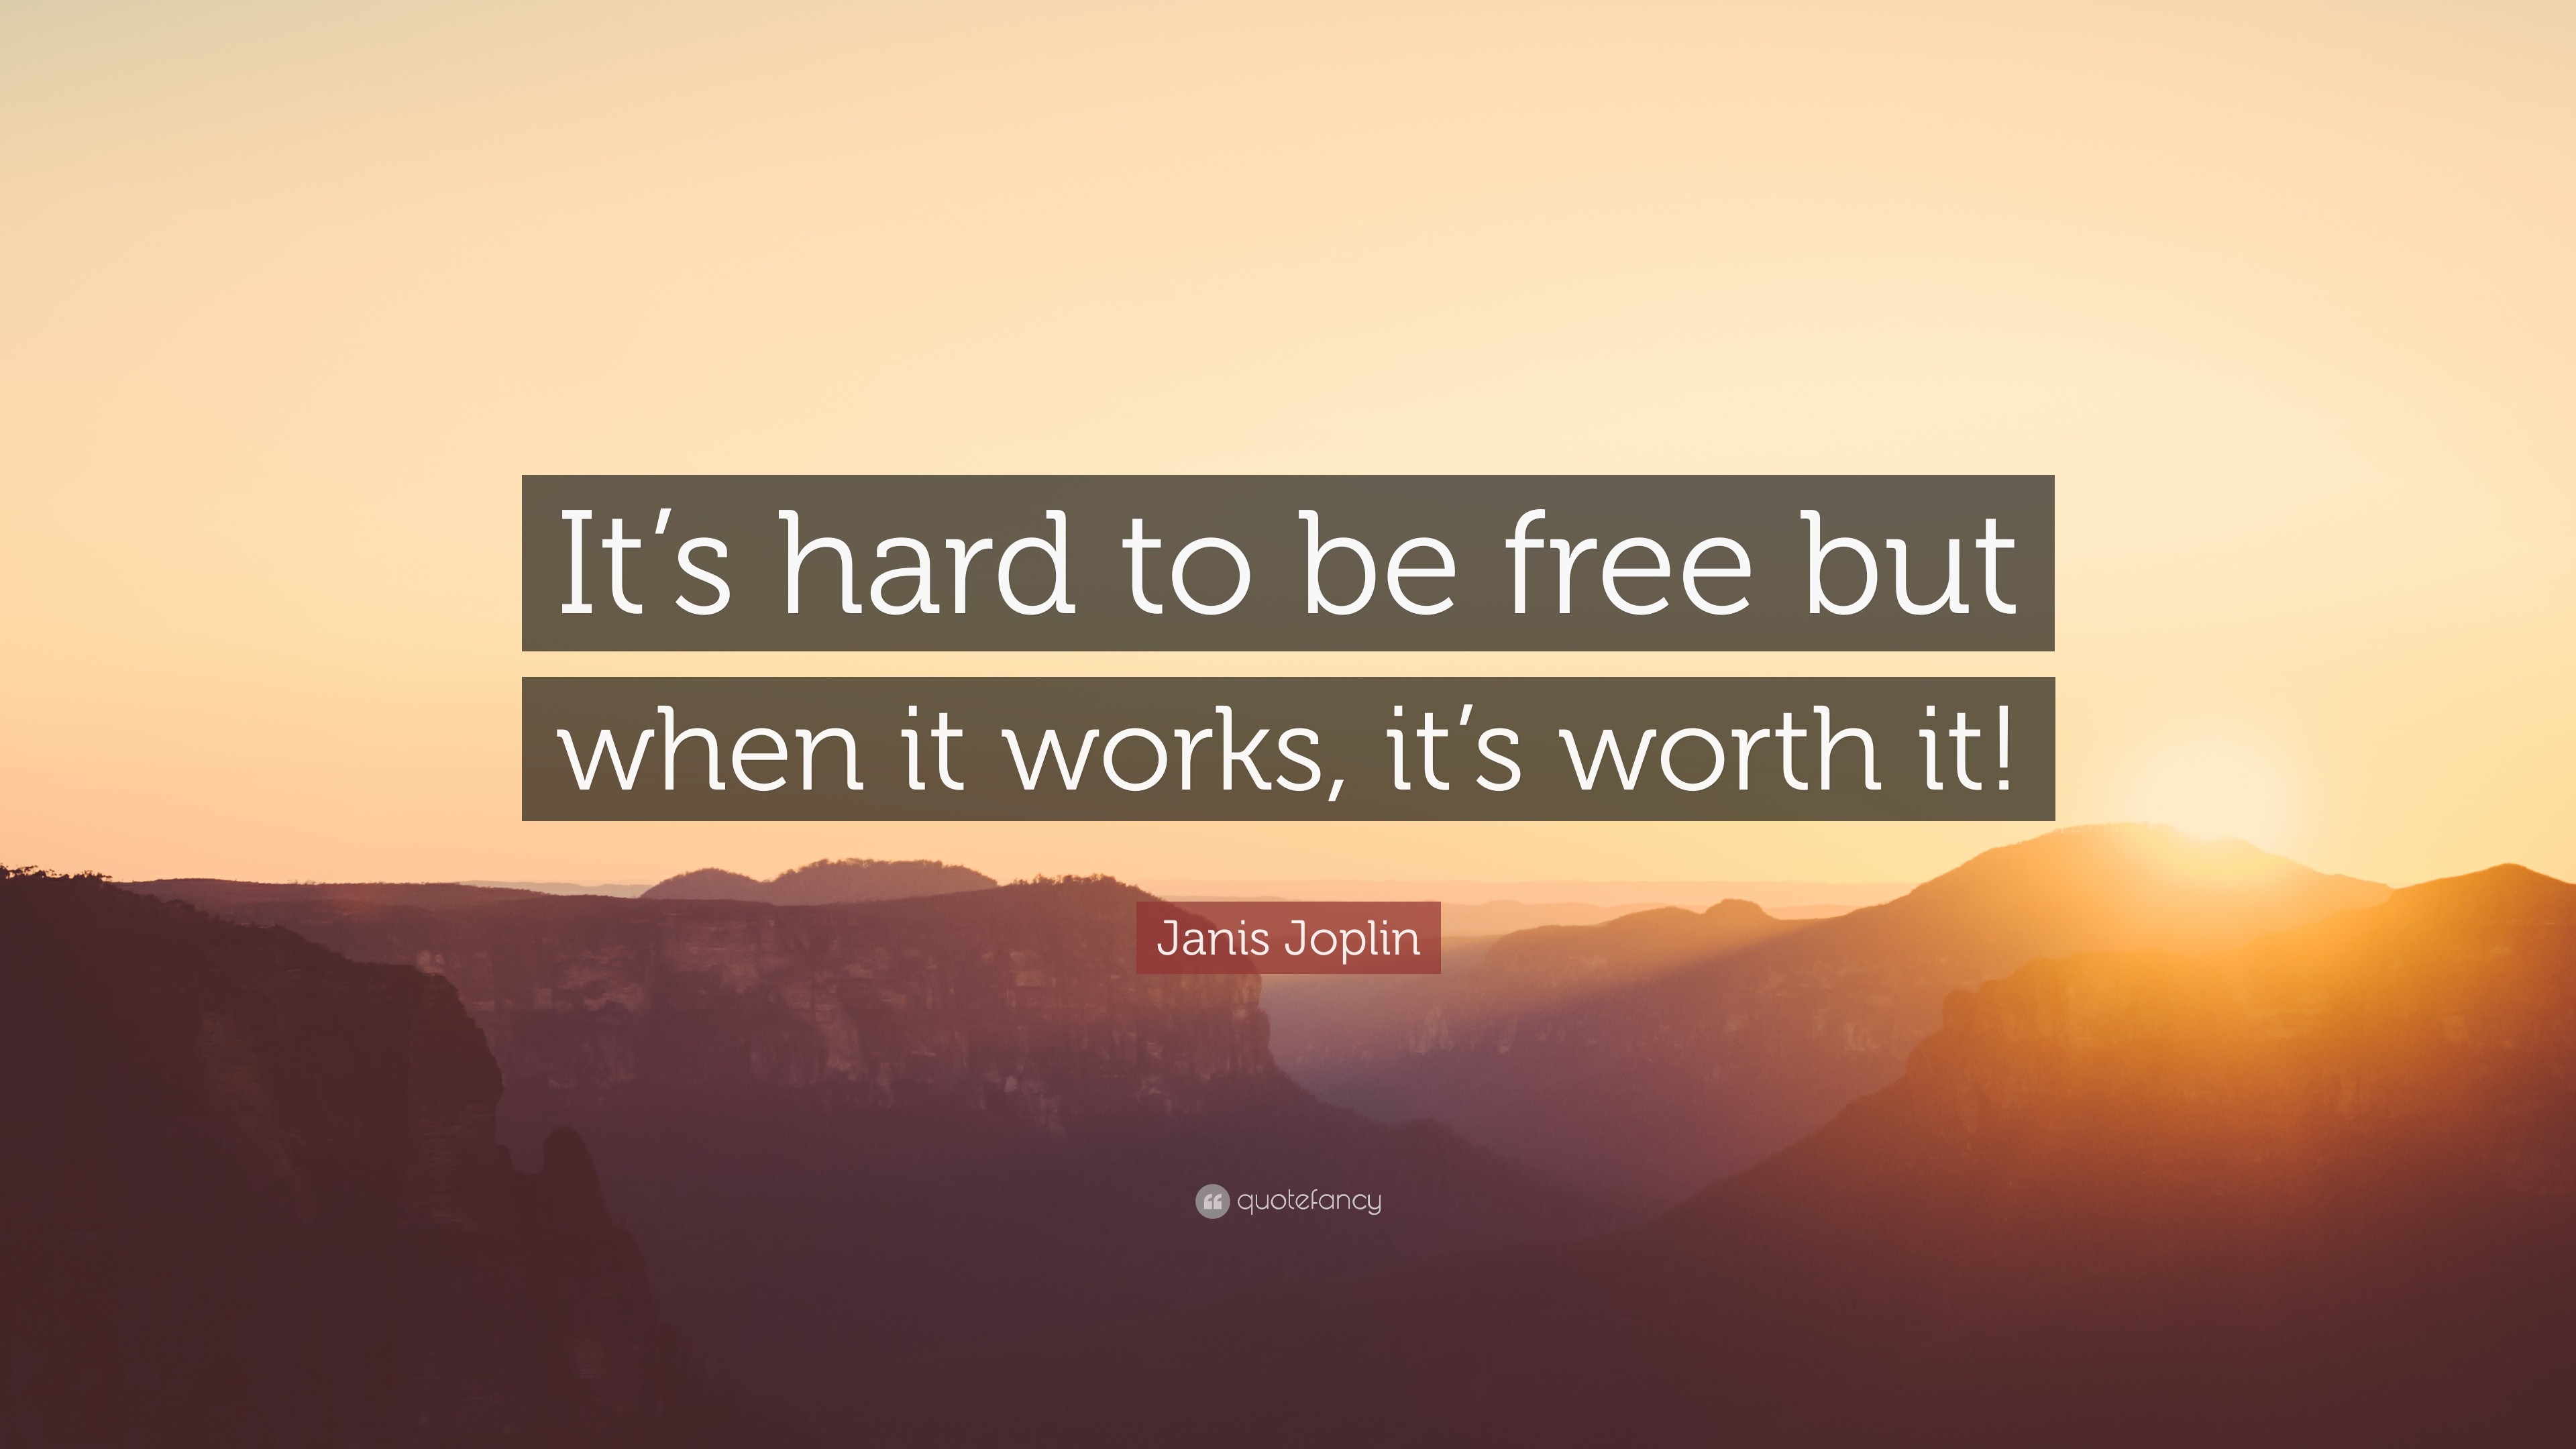 3840x2160 Janis Joplin Quote: “It's hard to be free but when it works, it's